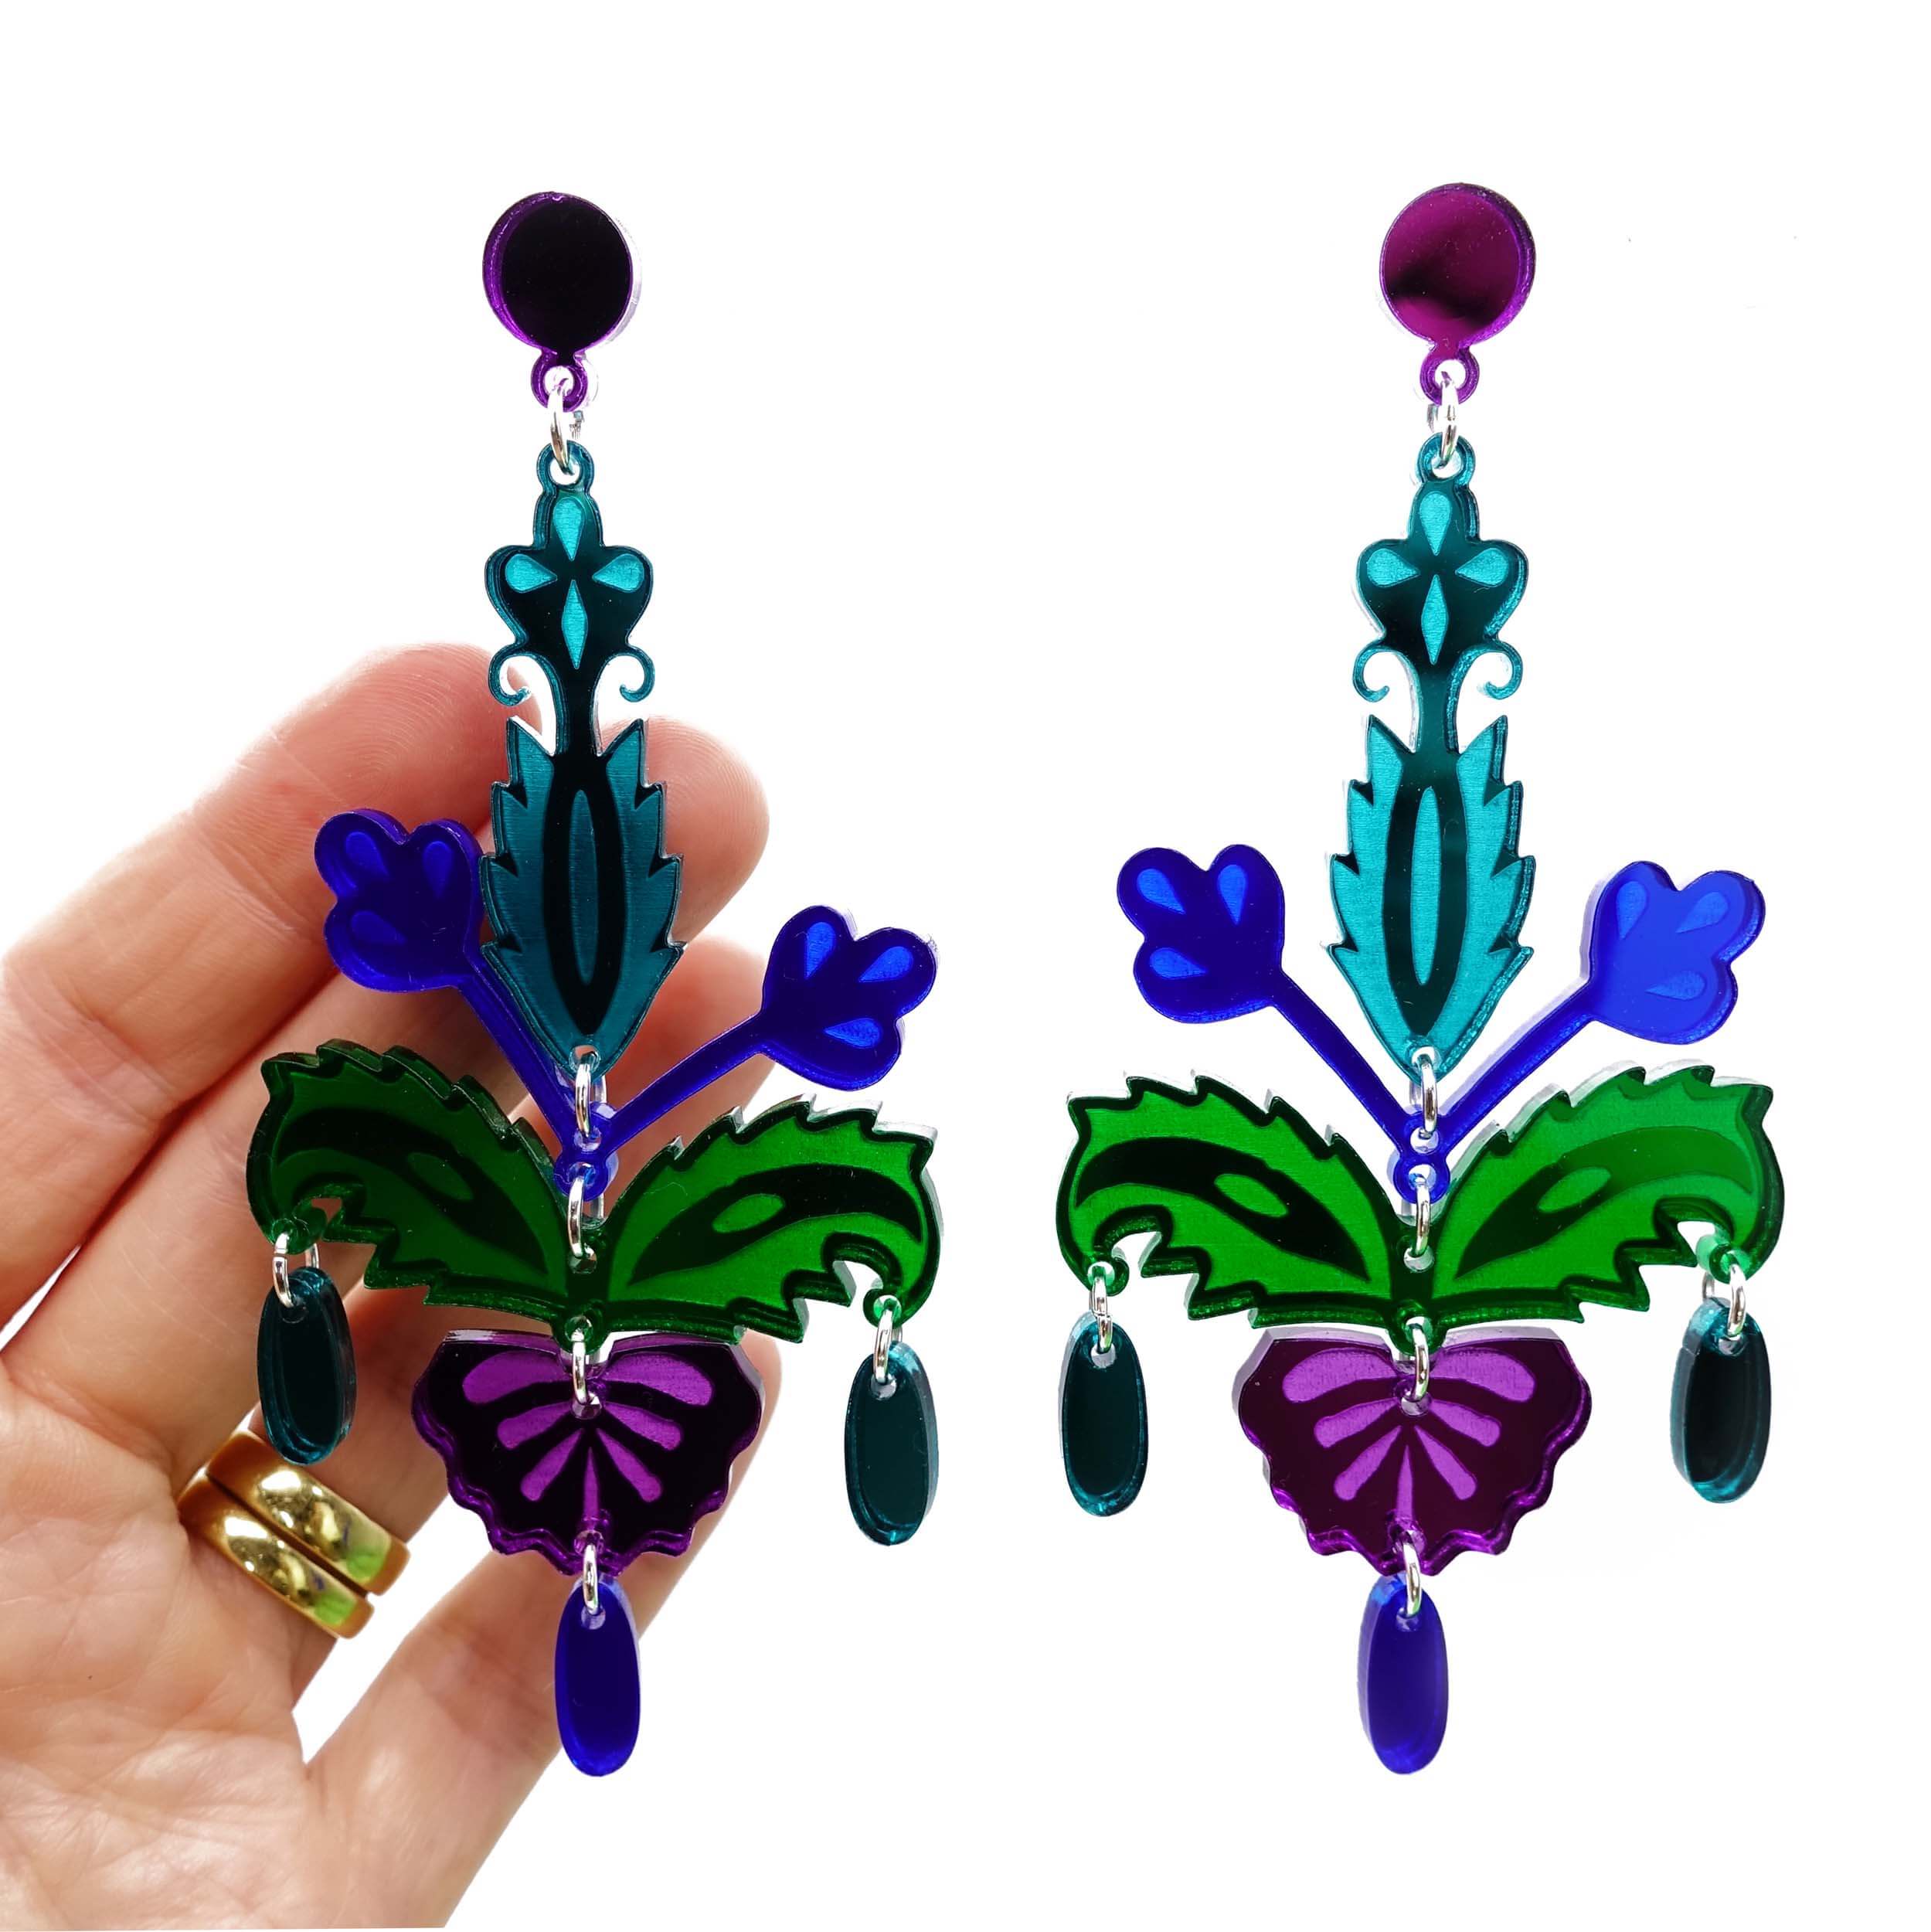 Midnight blue, green and purple mirror large statement Festival drop earrings designed by Sarah Day for Wear and Resist, shown hanging with a hand behind for scale. 